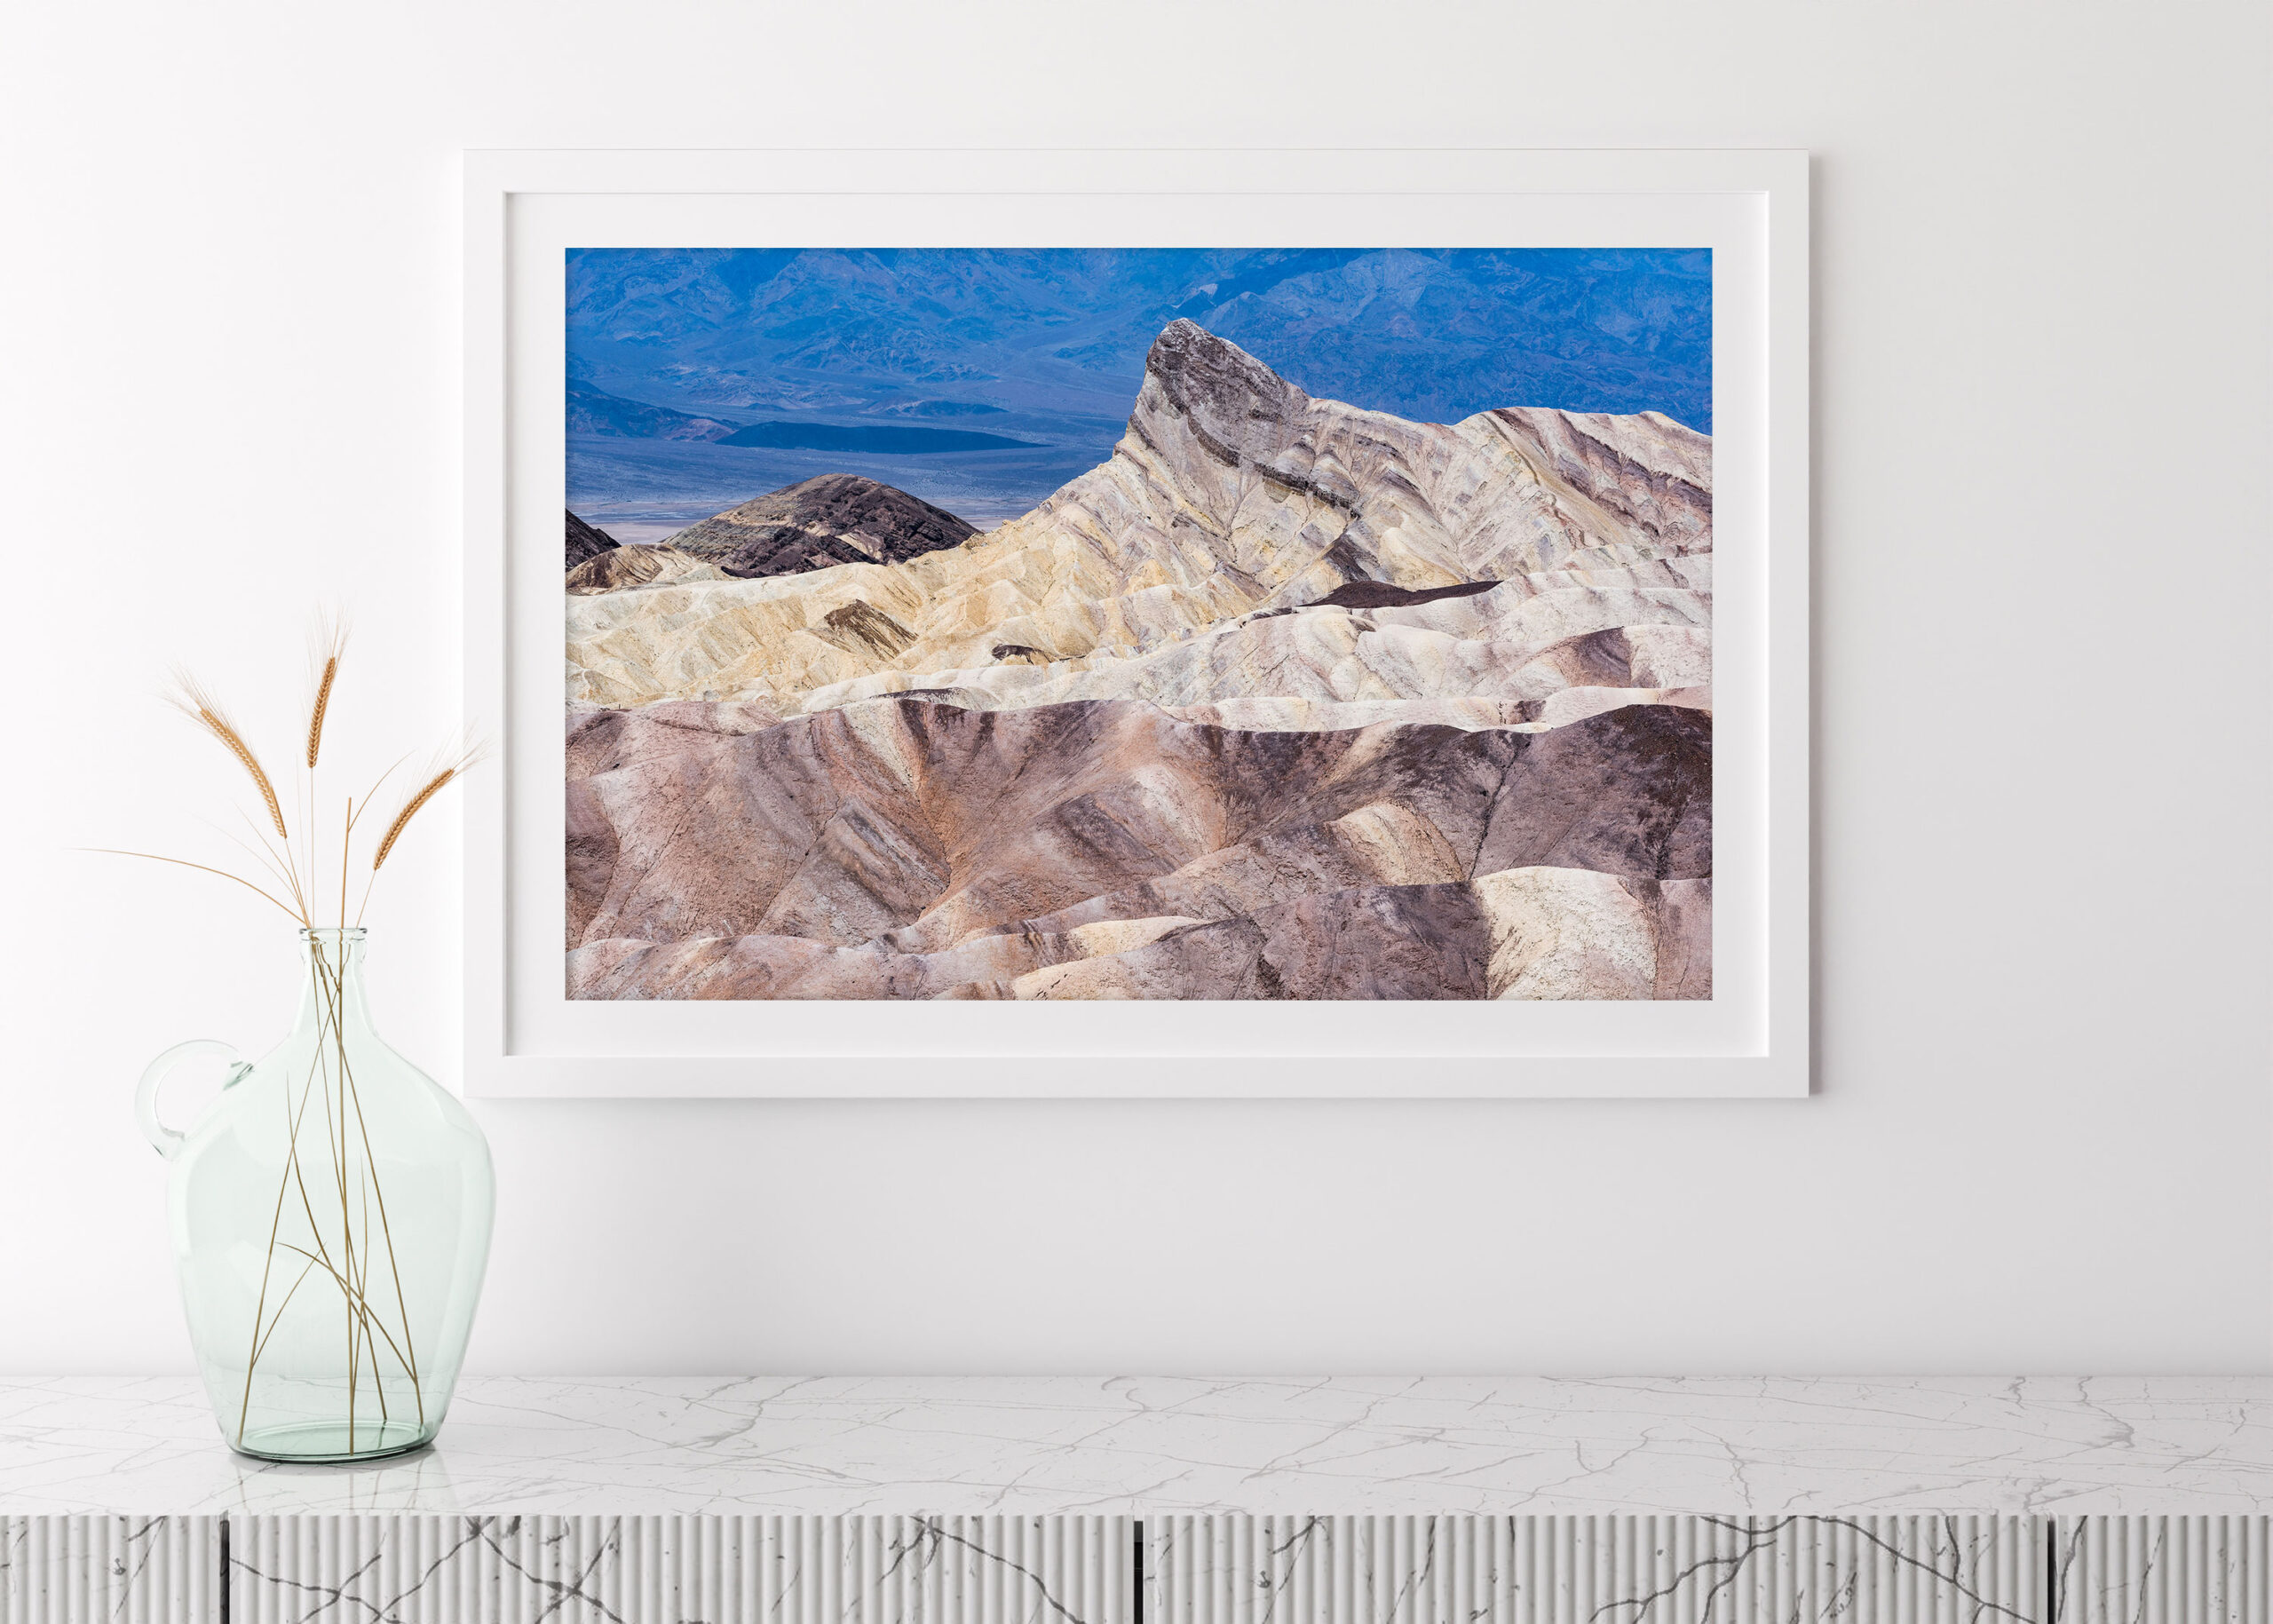 Photograph inserted in a frame to show how fine art prints look.